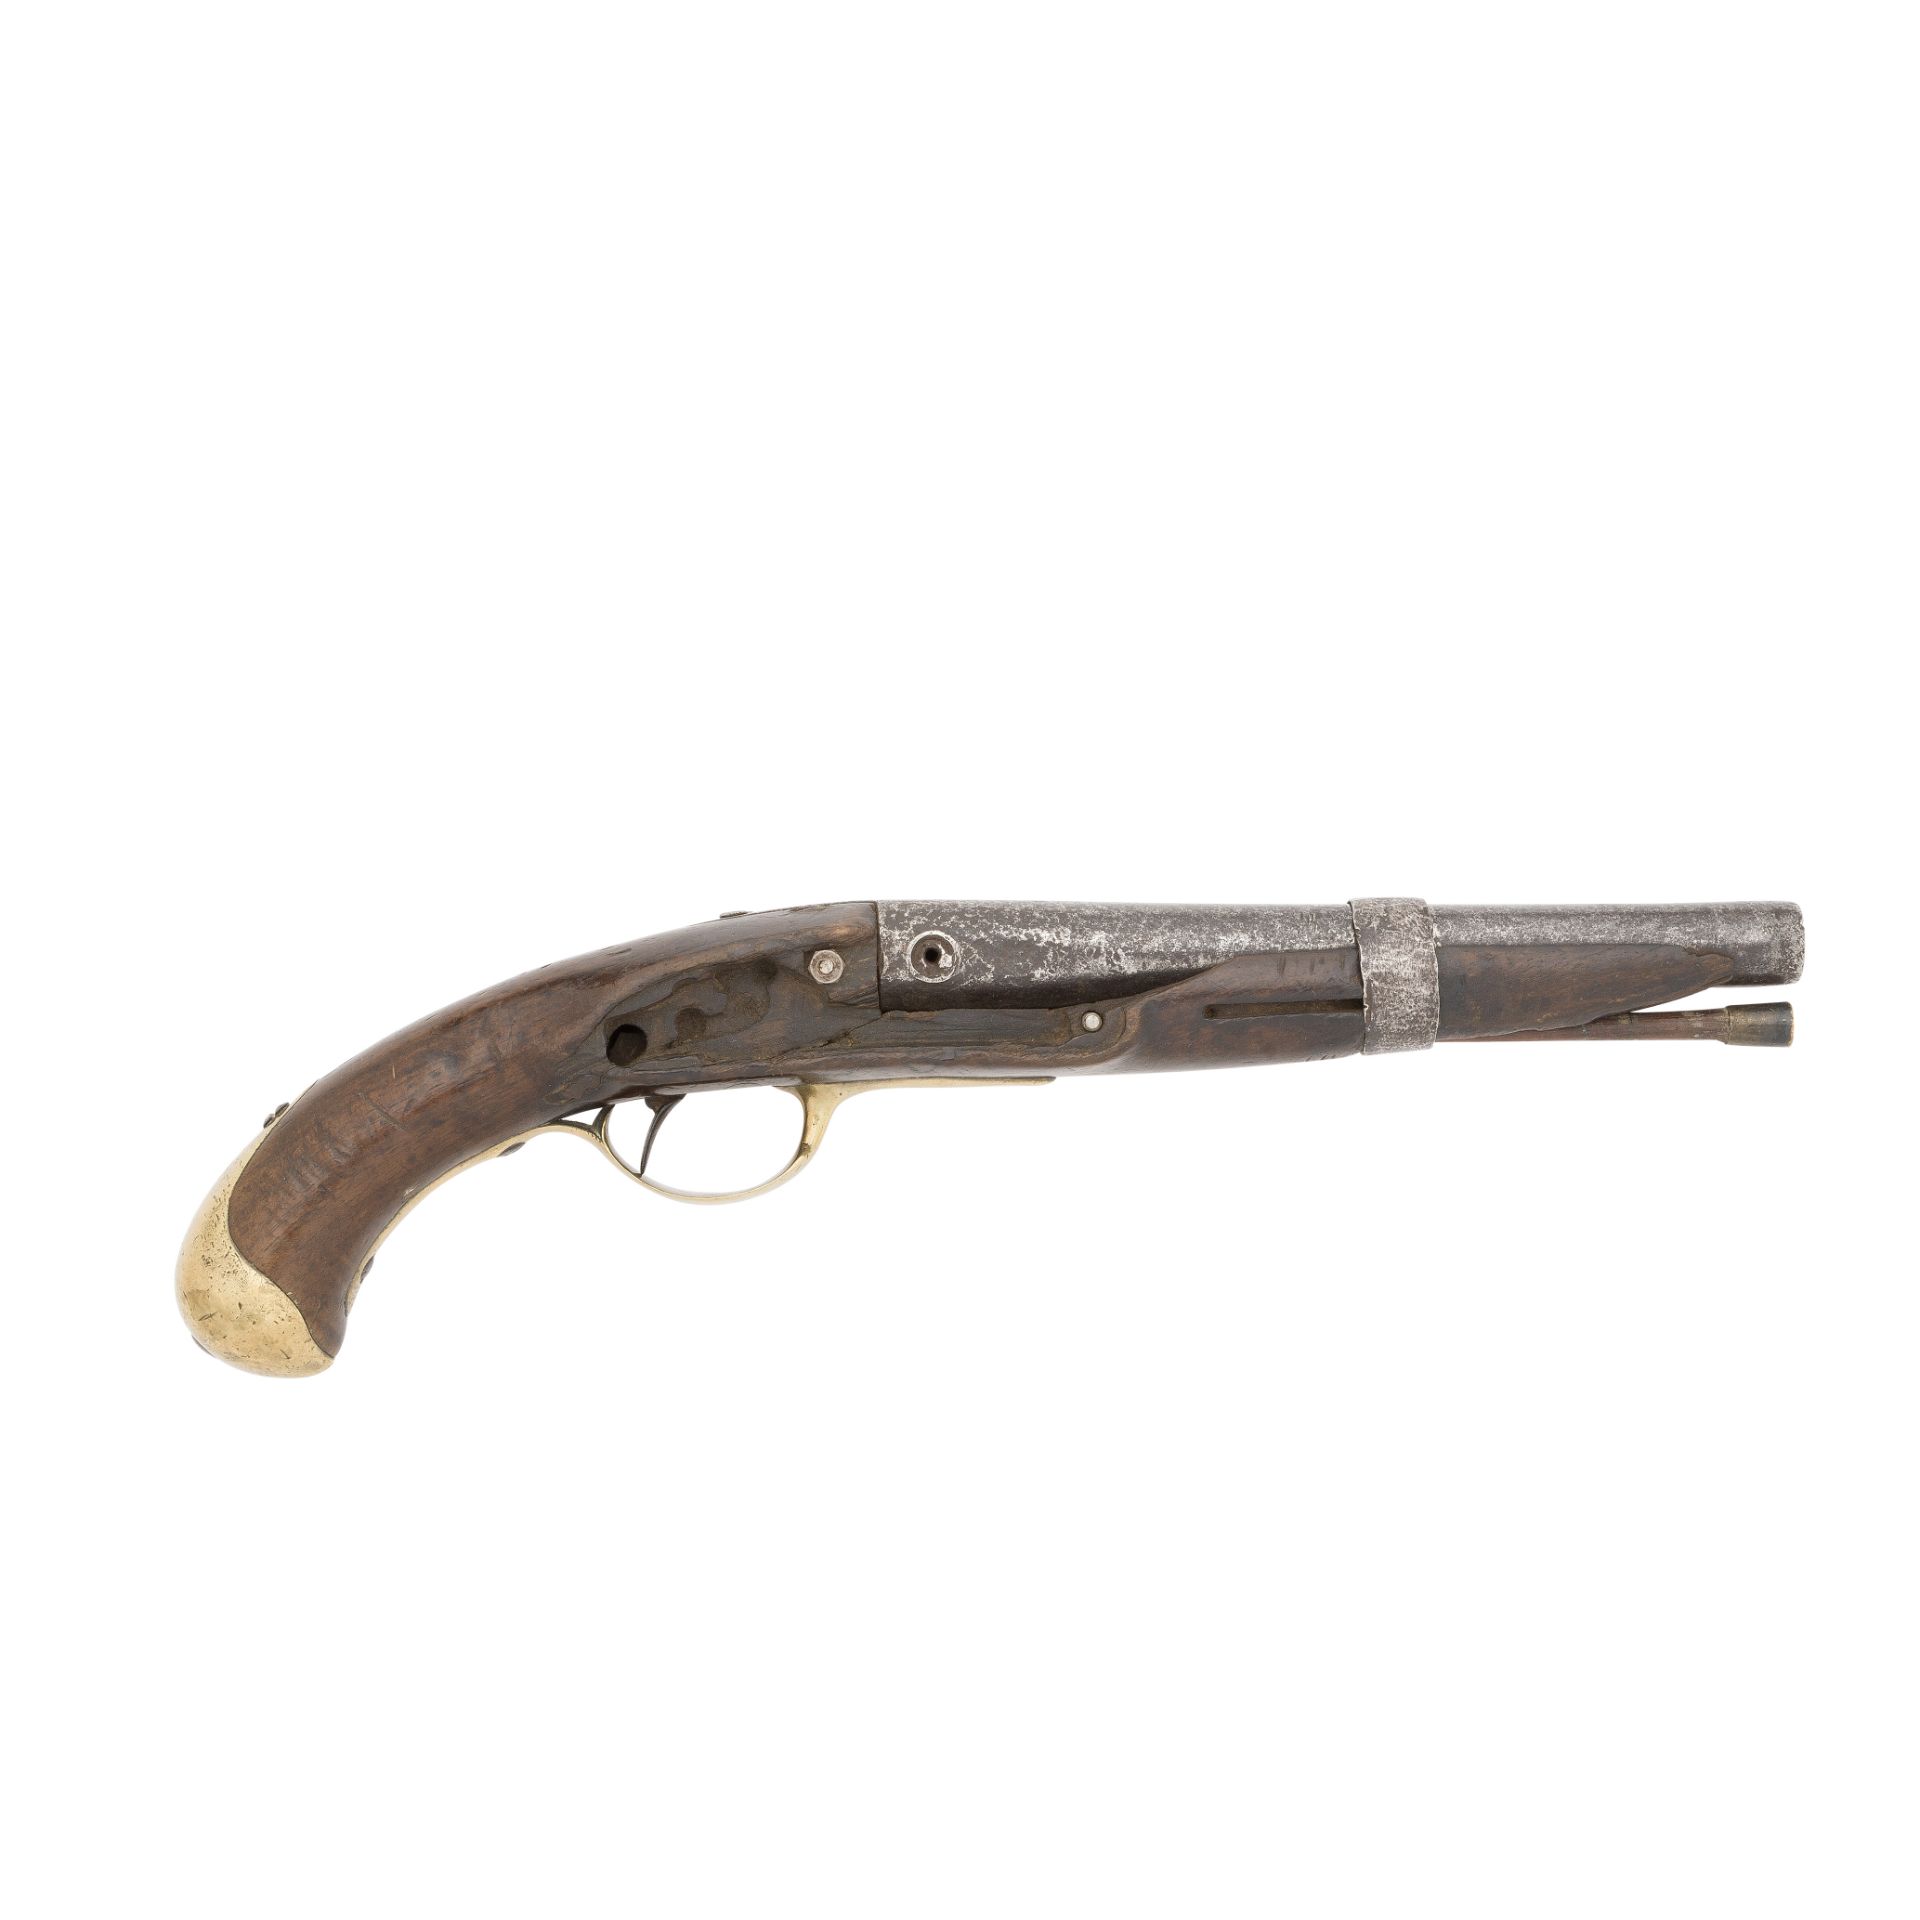 A French 12-Bore 1763/66 Model Military Pistol